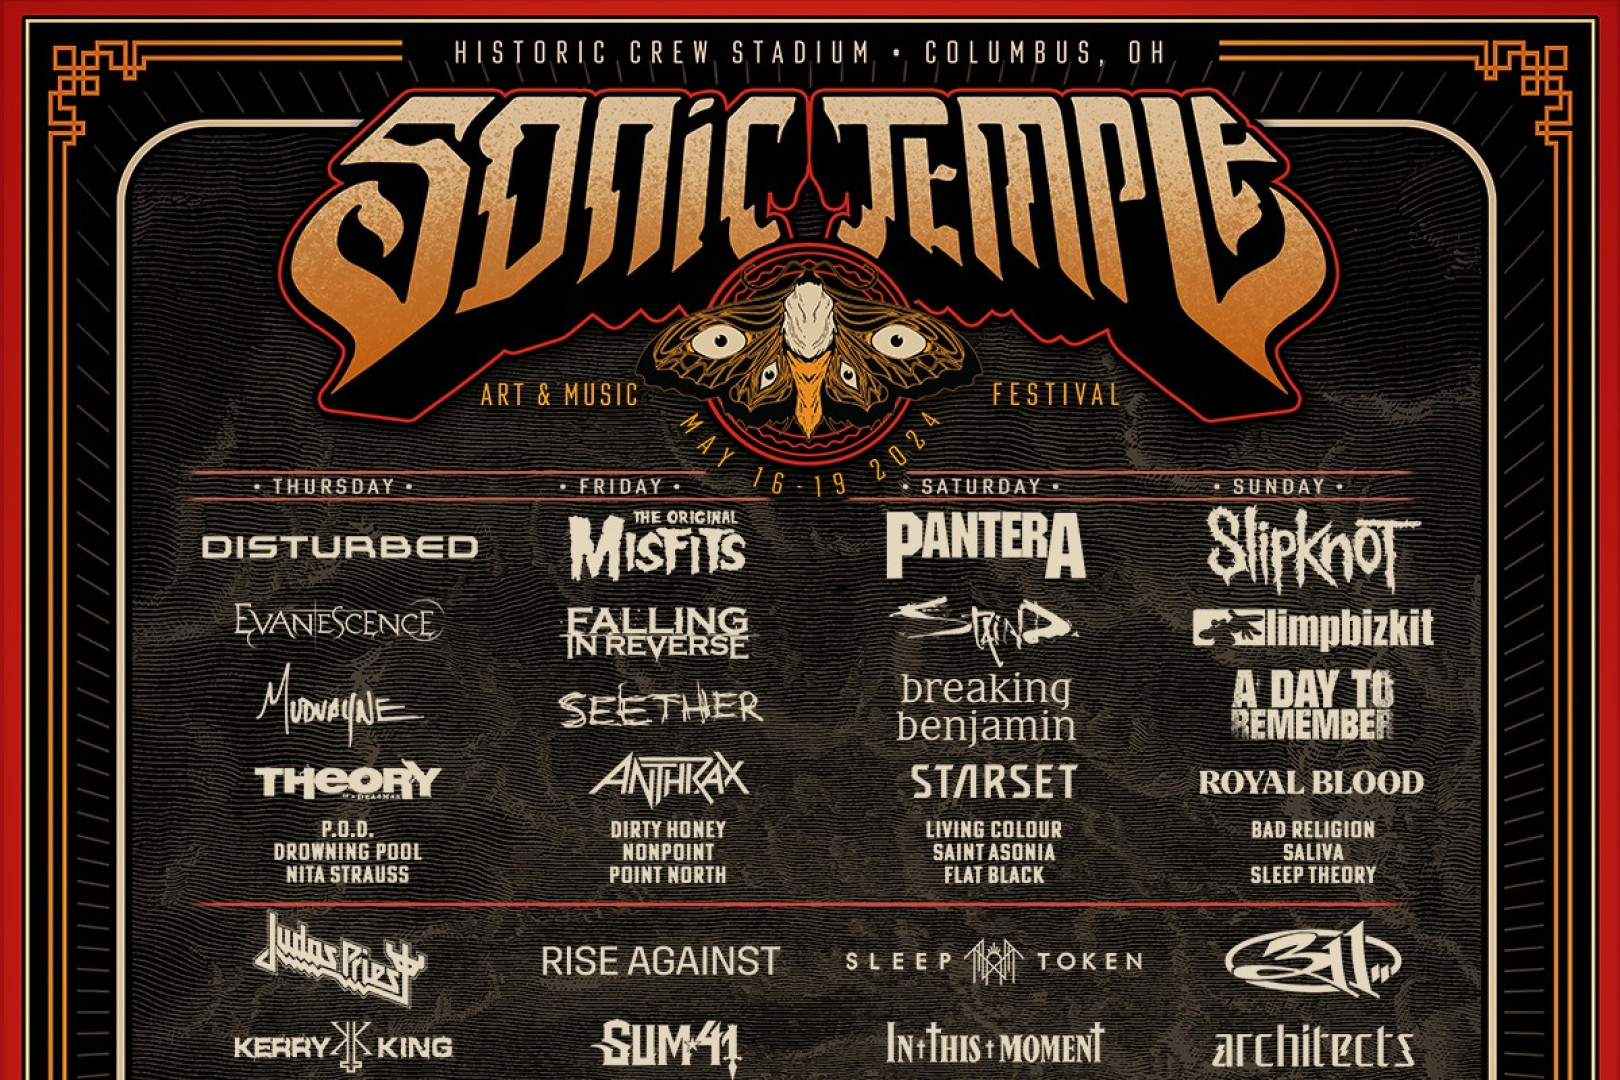 Misfits, Judas Priest, Kerry King, Chats, Chisel, Rise Against, L7 to play Sonic Temple